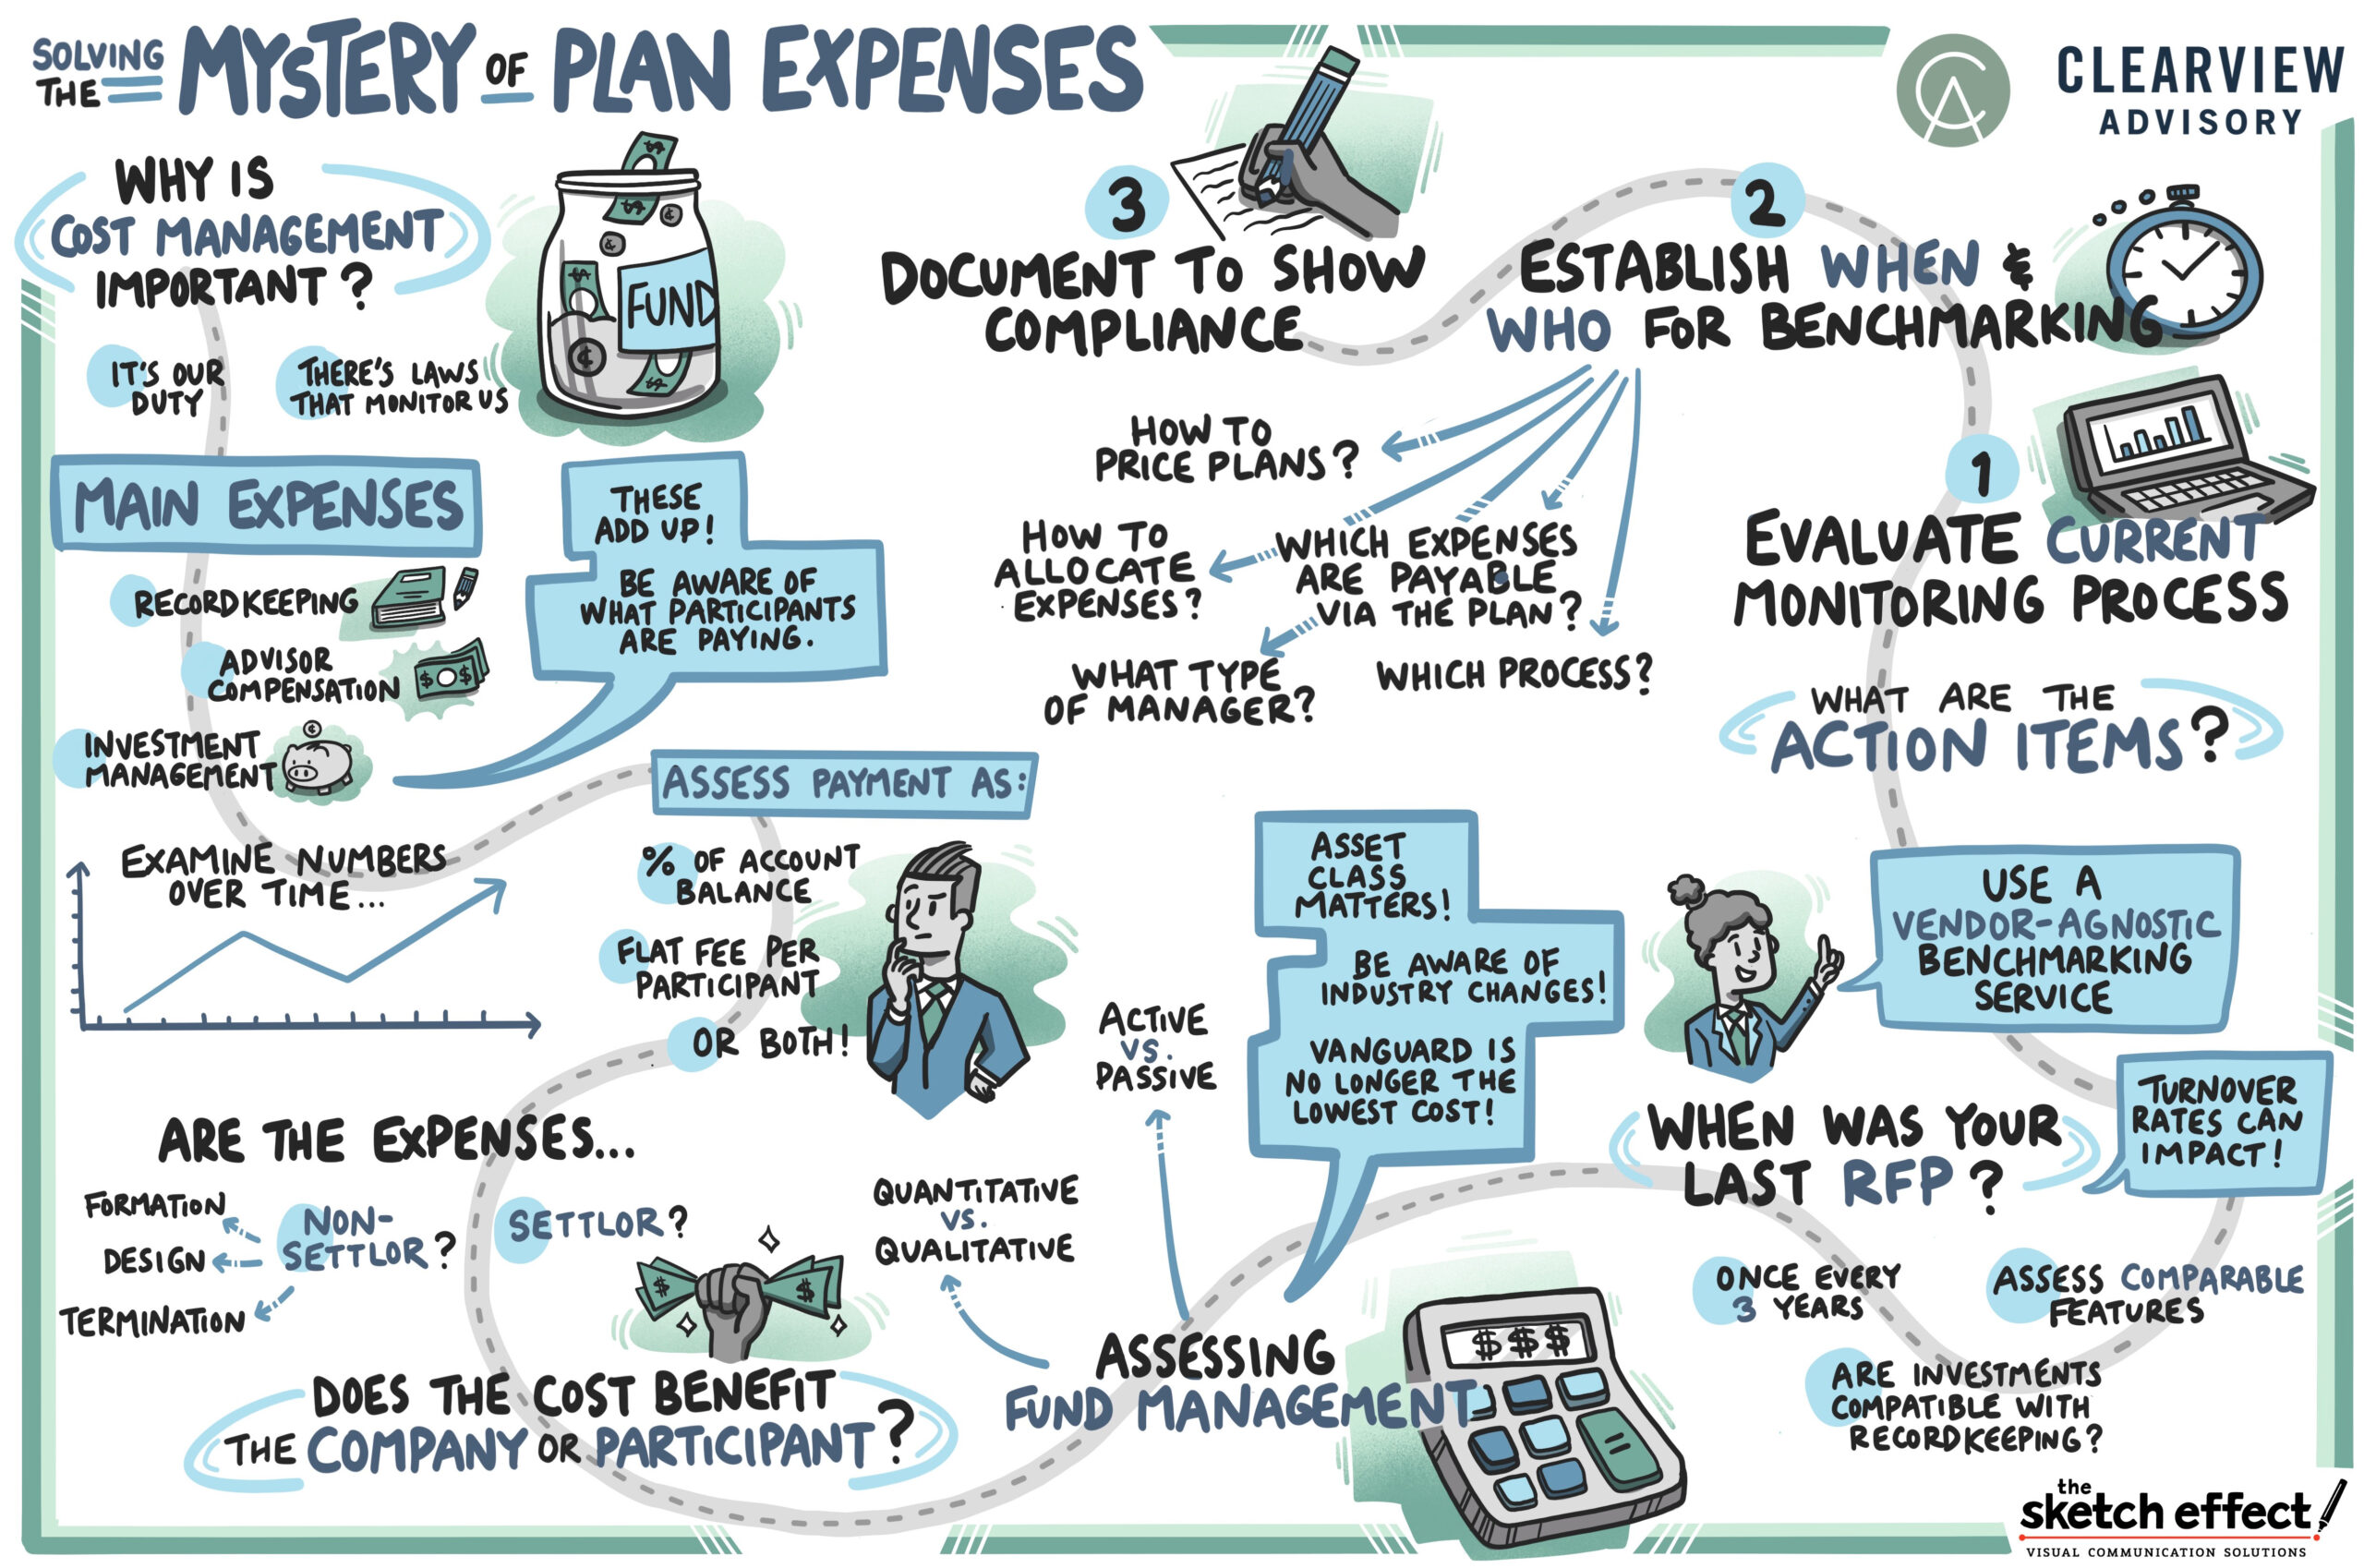 Image of graphic recording titled "Solving The Mystery of Plan Expenses"